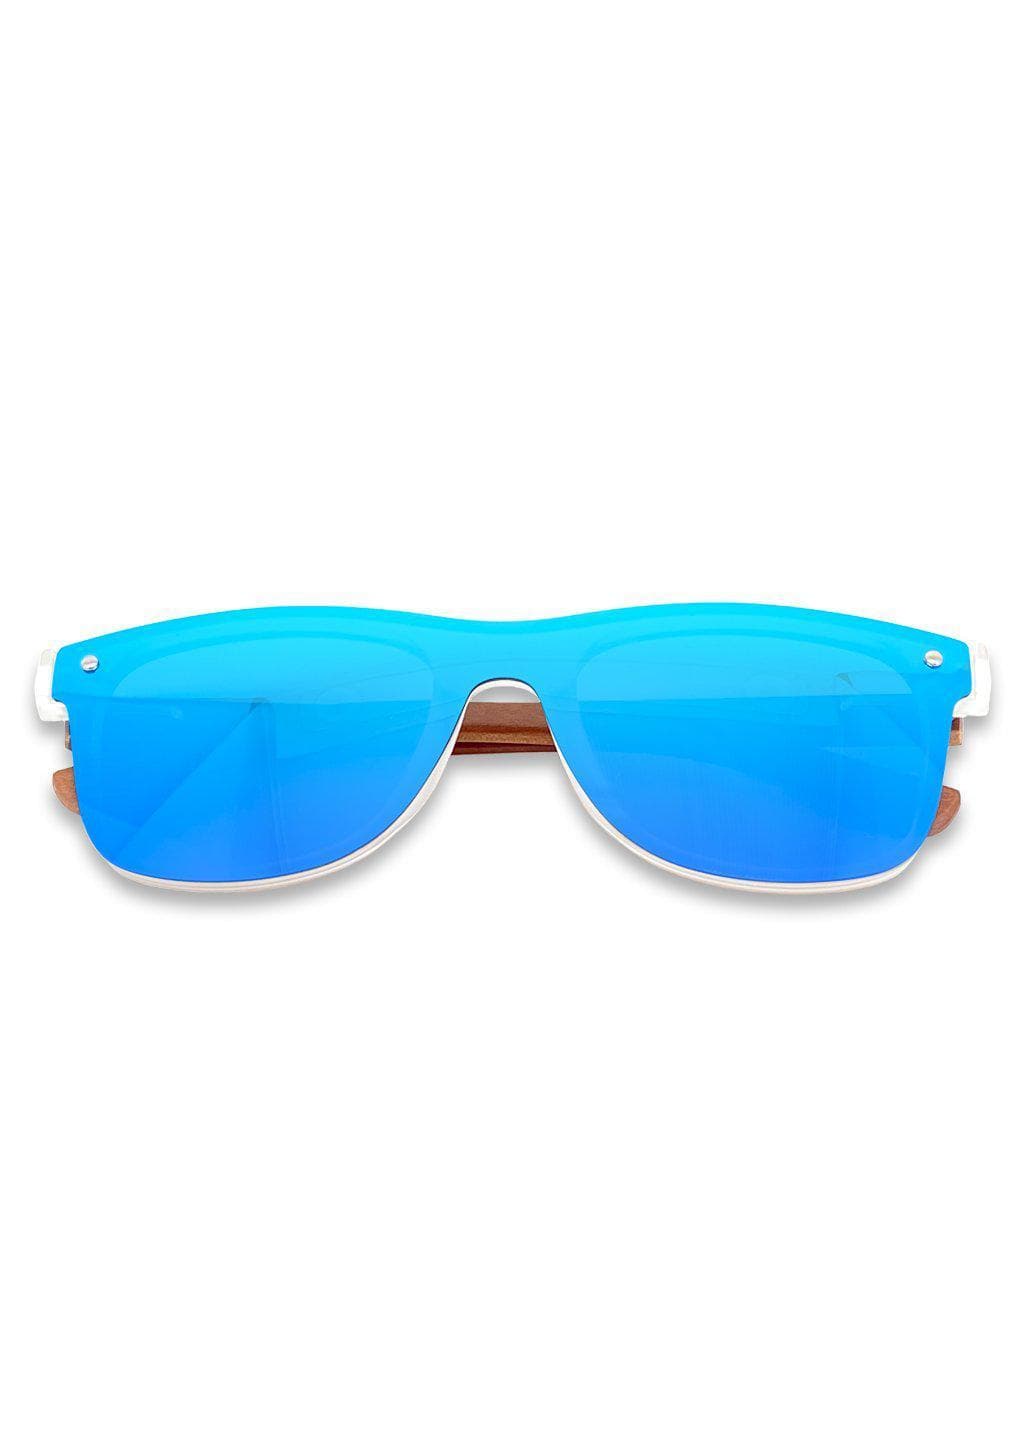 Eyewood tomorrow is our modern cool take on classic models. This is Gemeni with blue mirror lenses. Nice wooden sunglasses.